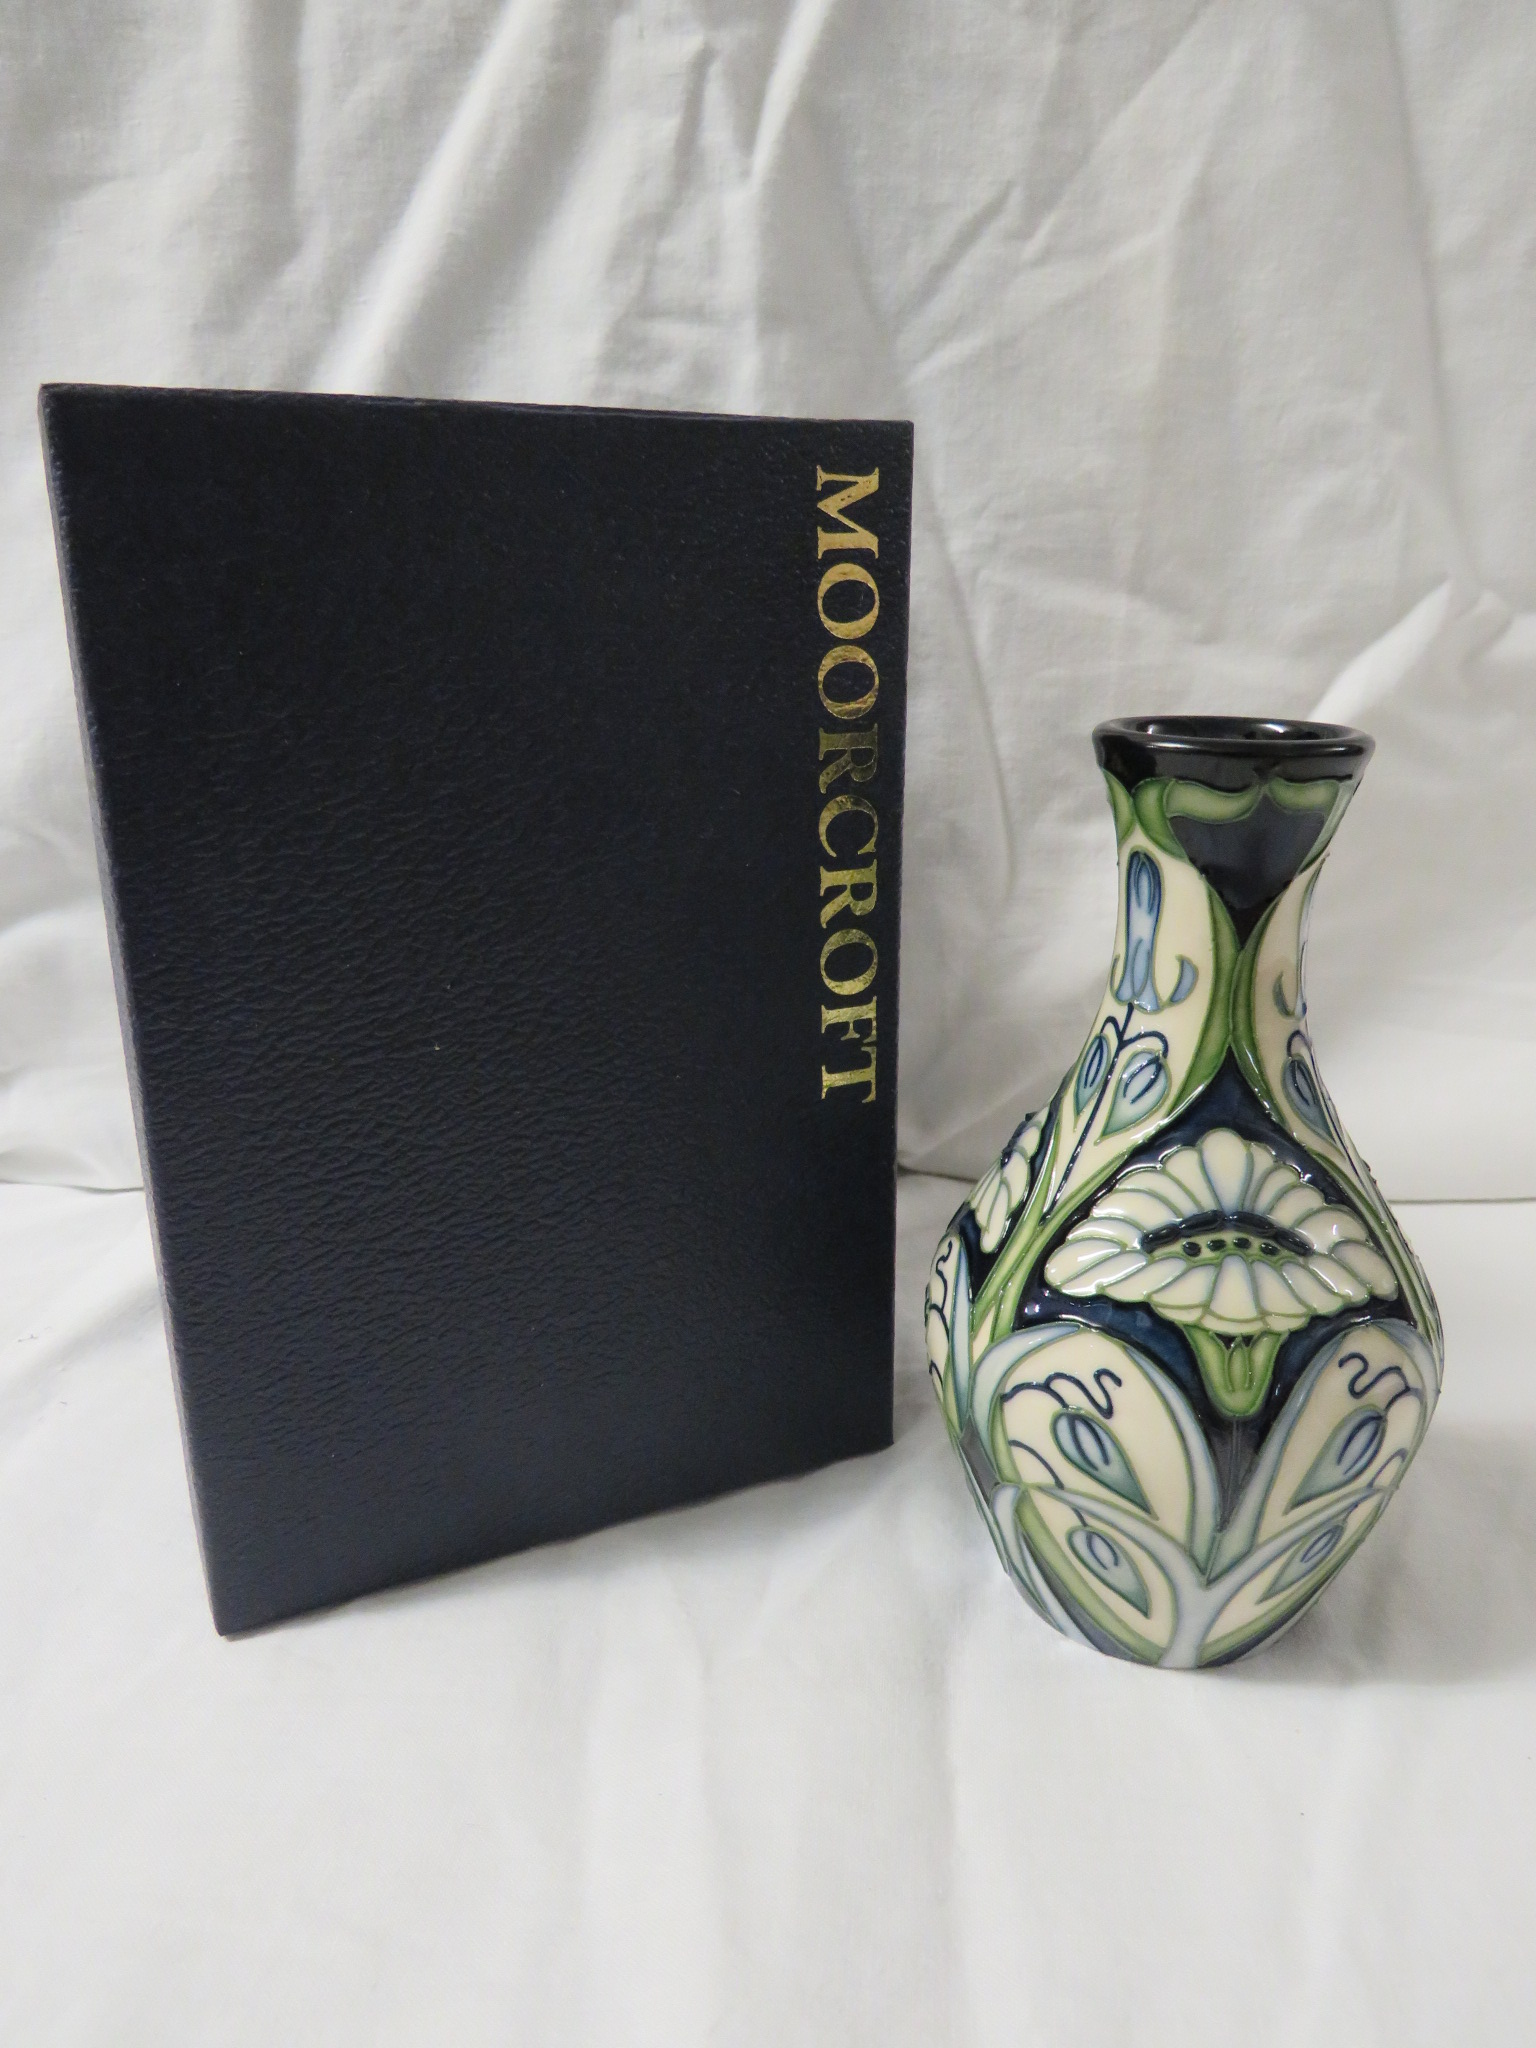 Moorcroft pottery Rain Daisy one star members vase of baluster form, dark blue ground with tube - Image 2 of 4